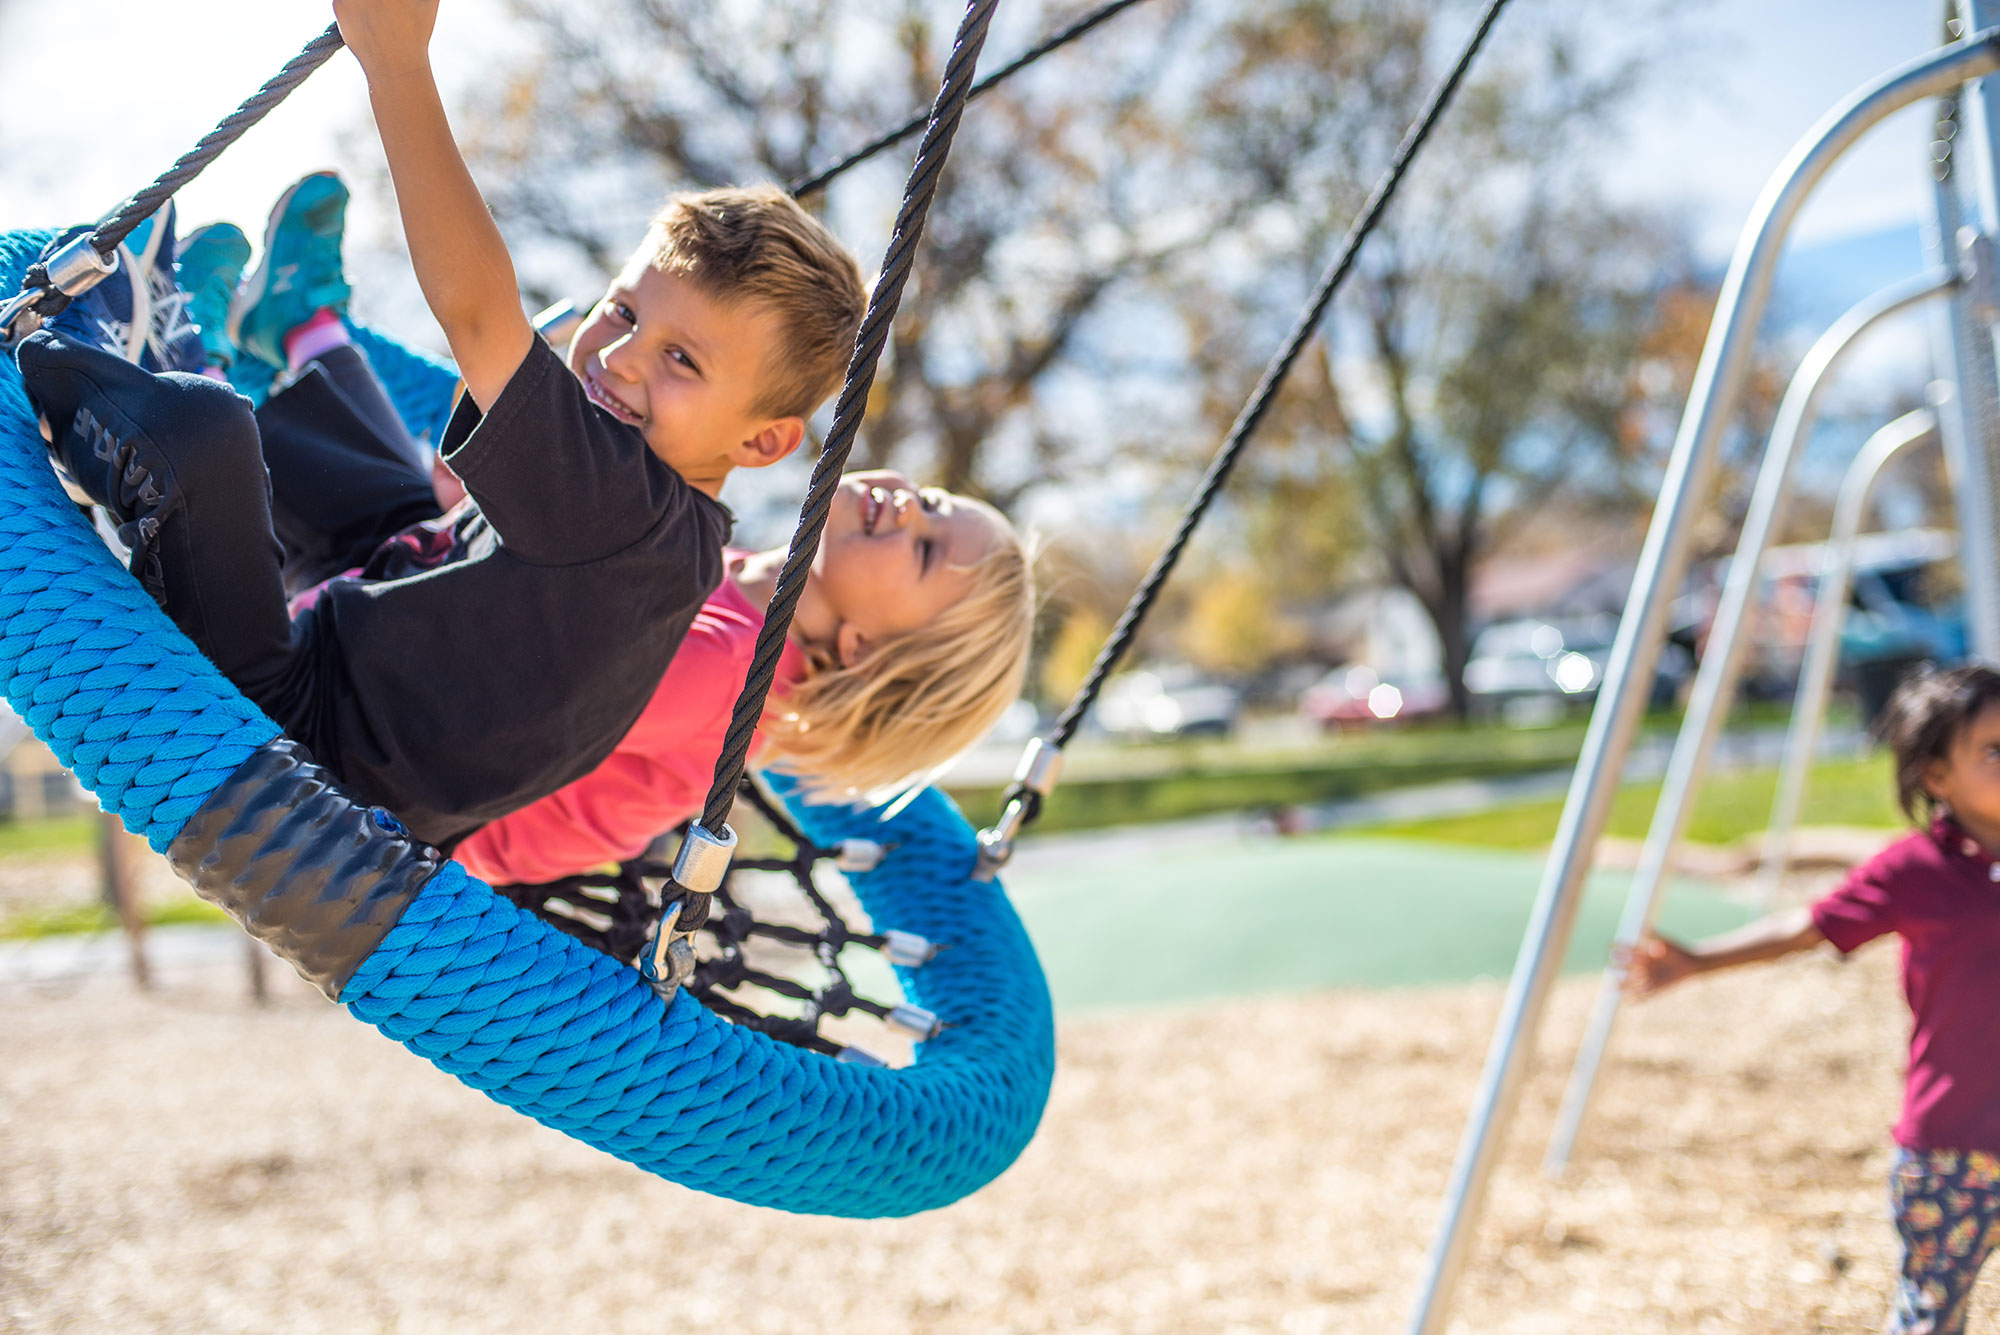 Two children playing on a swing at a playground.